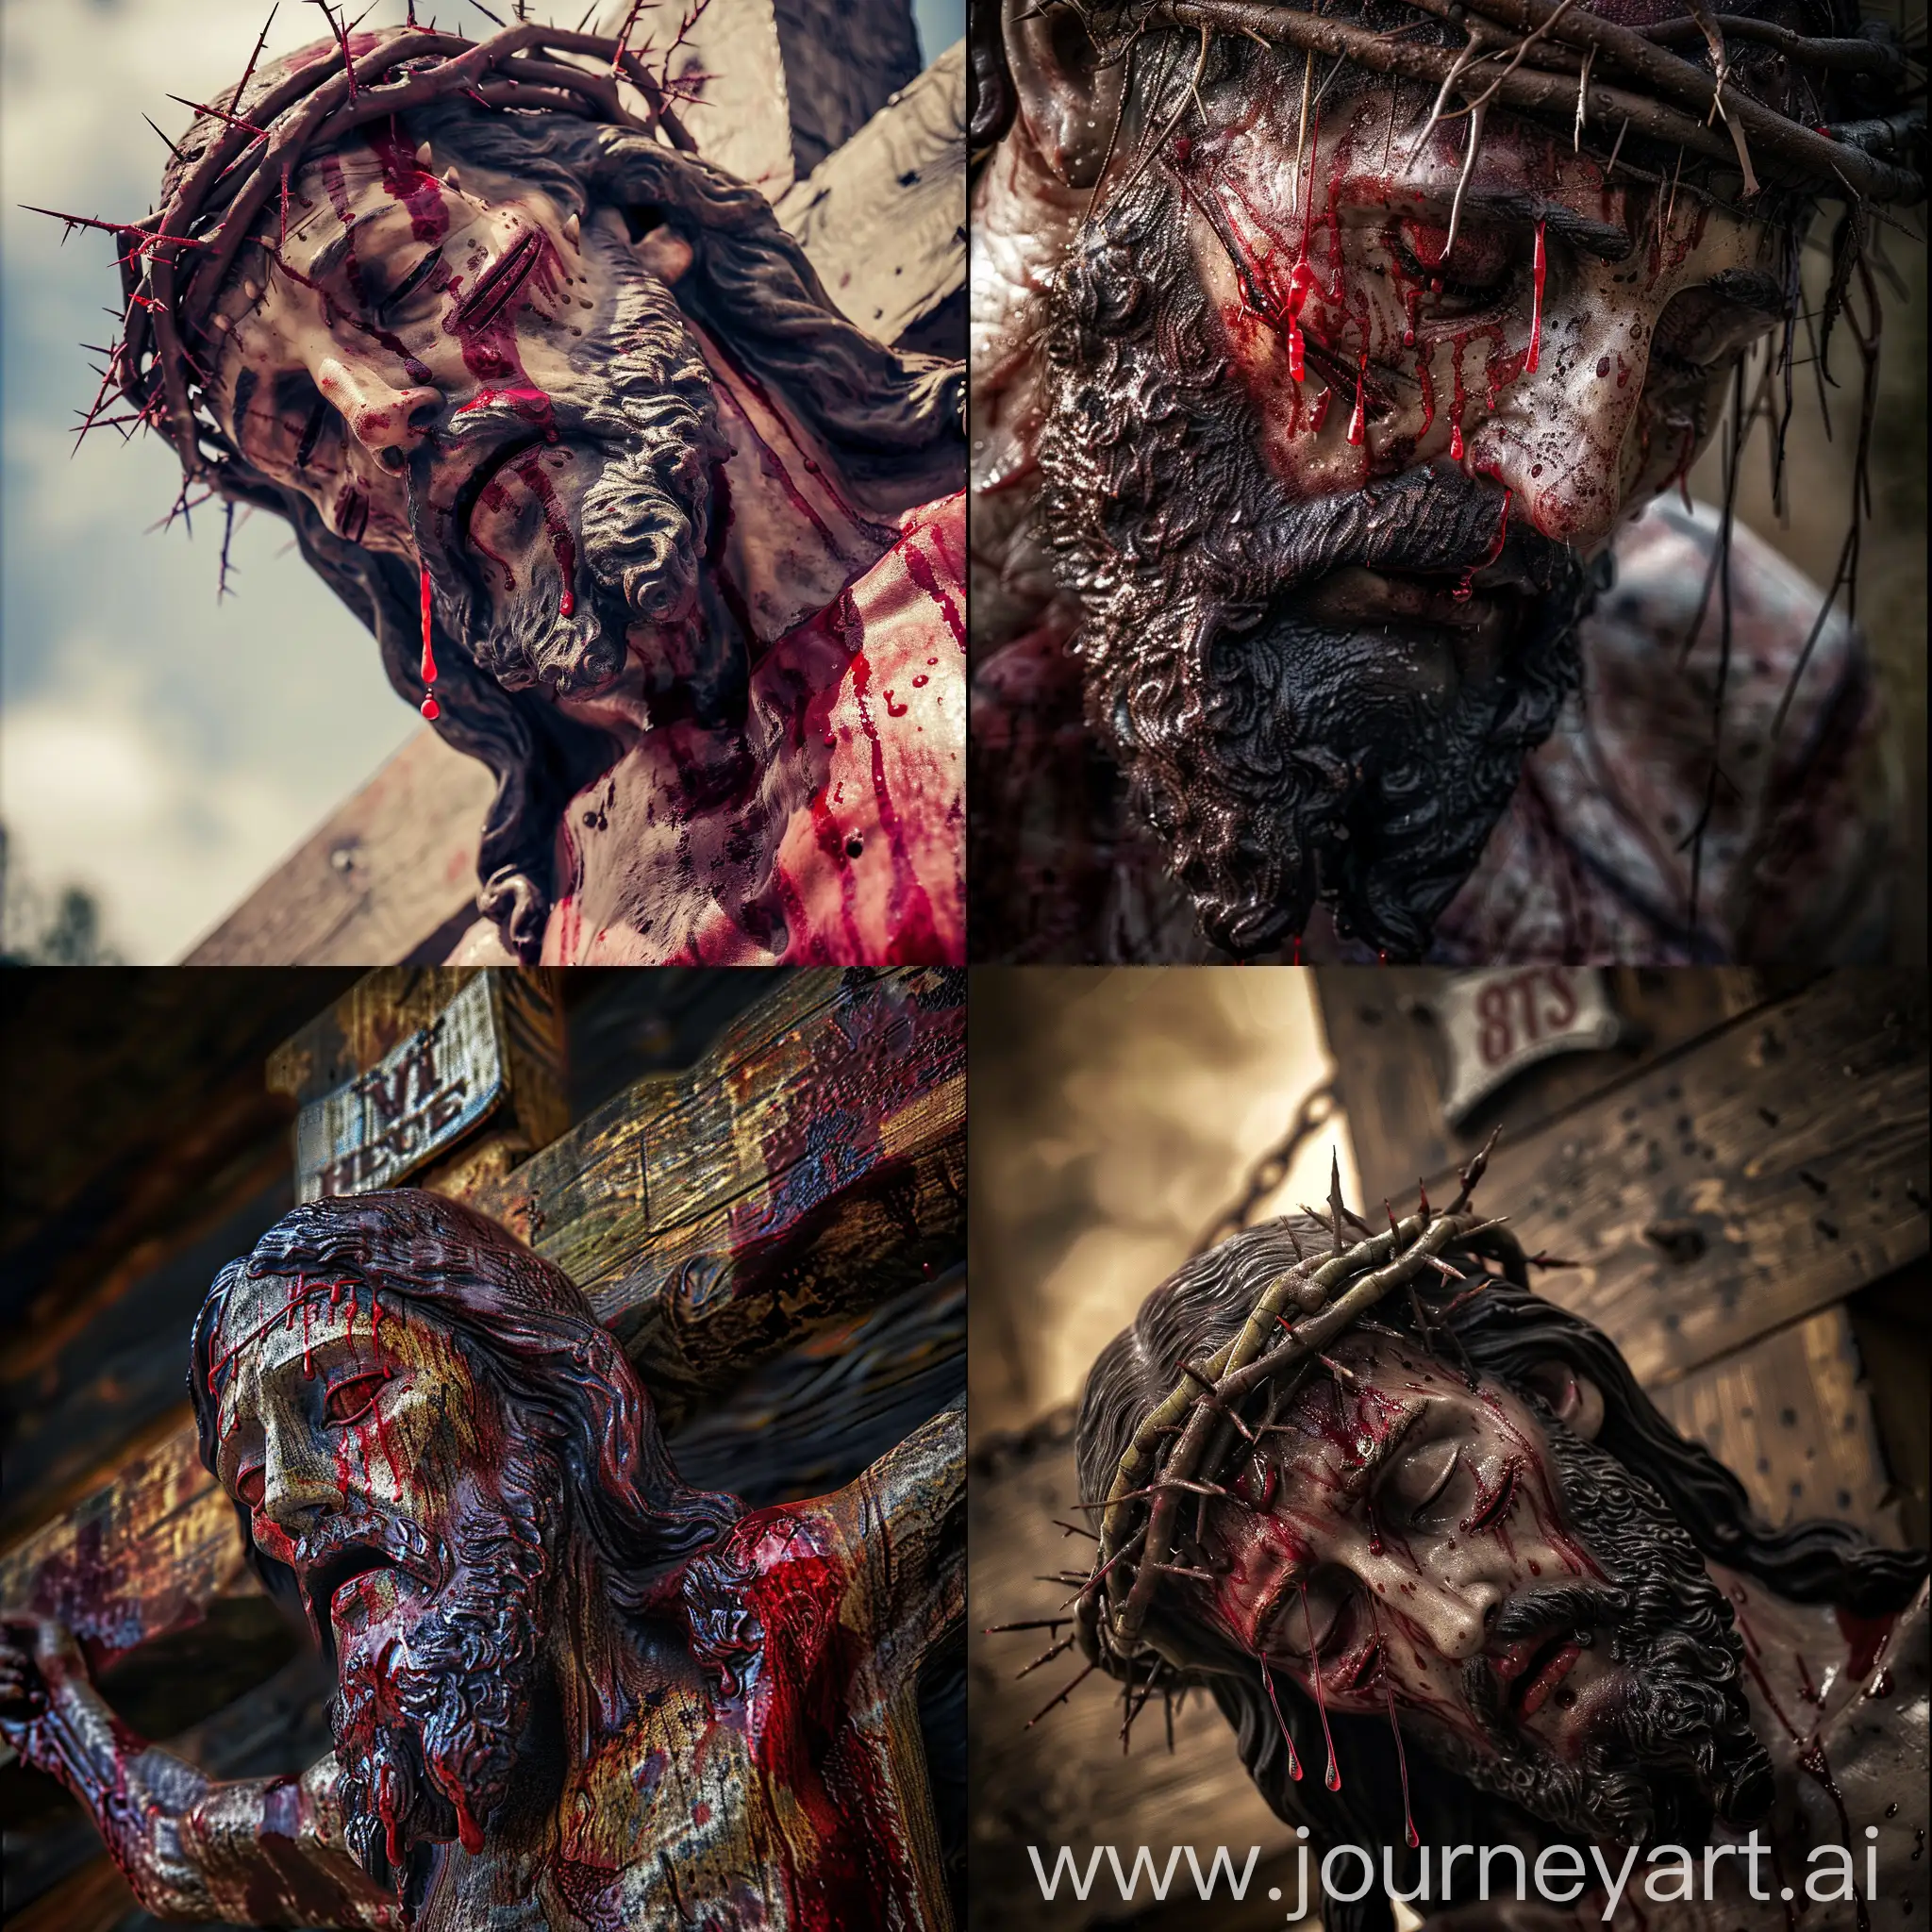 Jesus on big cross head blood and bein .hdr. reailtc. Ultra wide. 8k. Quilty ultra hd